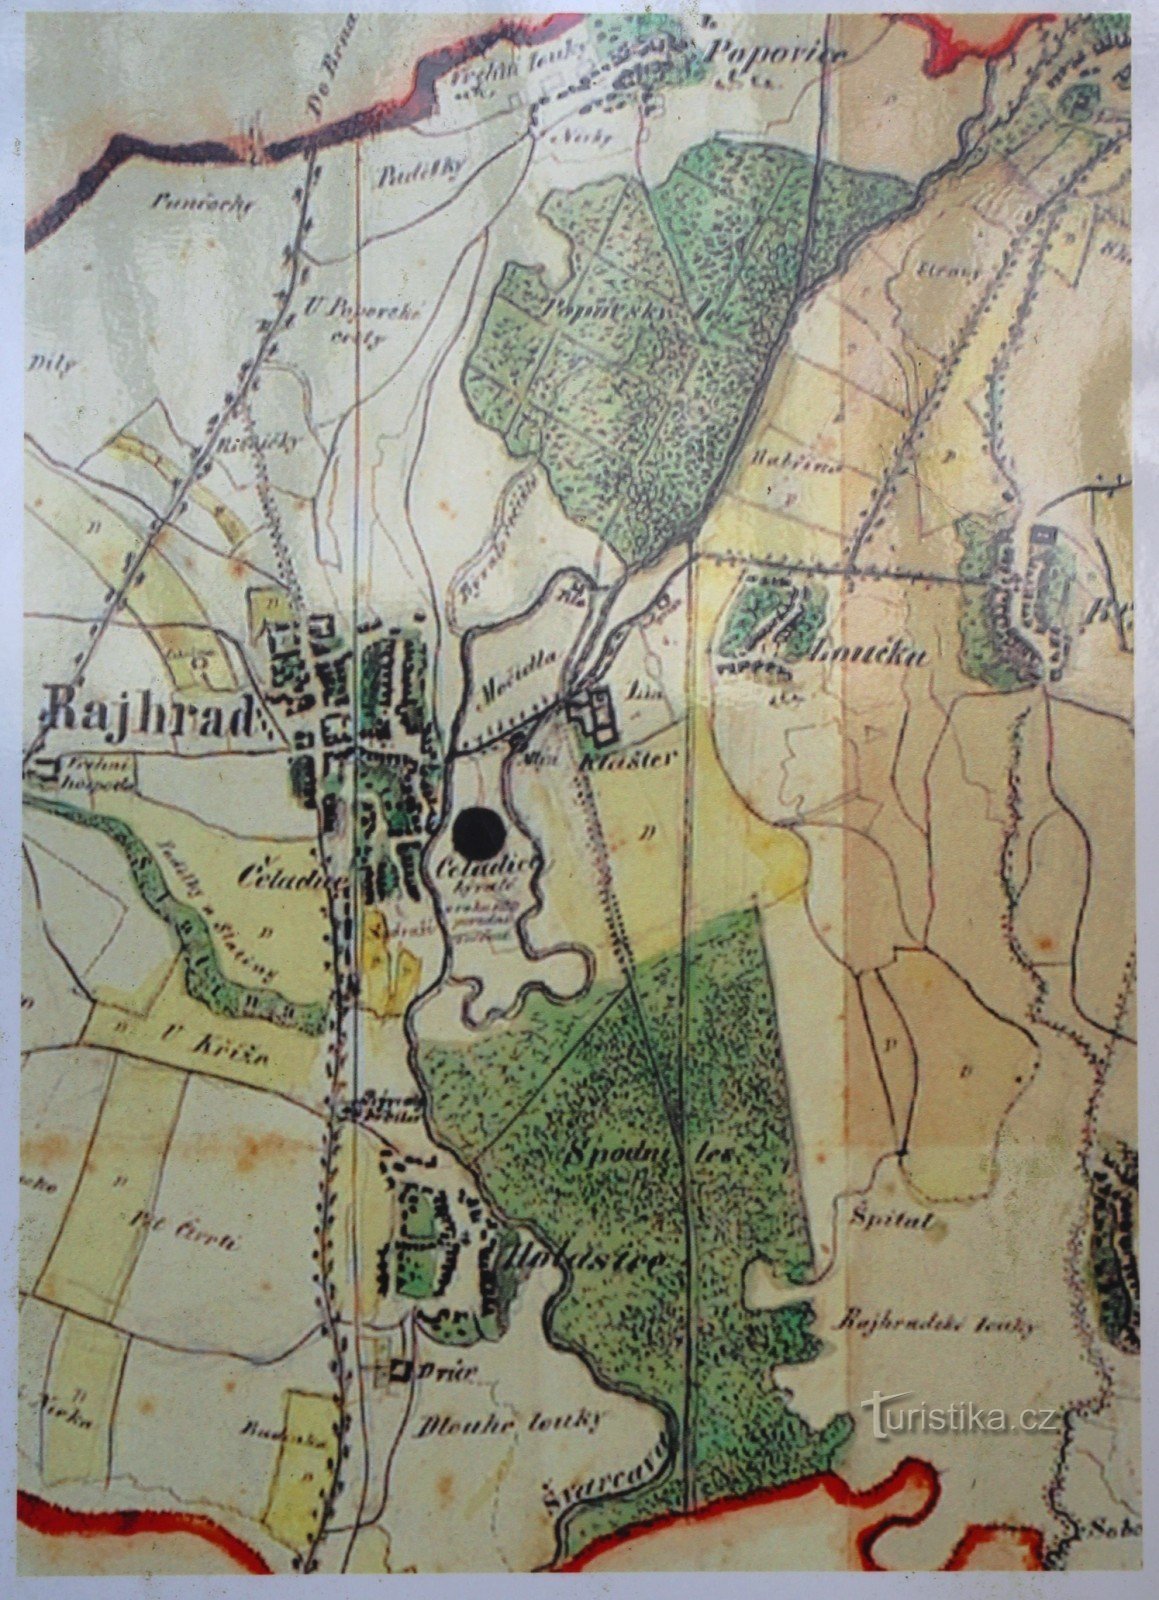 Map of the monastery's surroundings from the middle of the 19th century, it is clearly visible in the lower half of the map